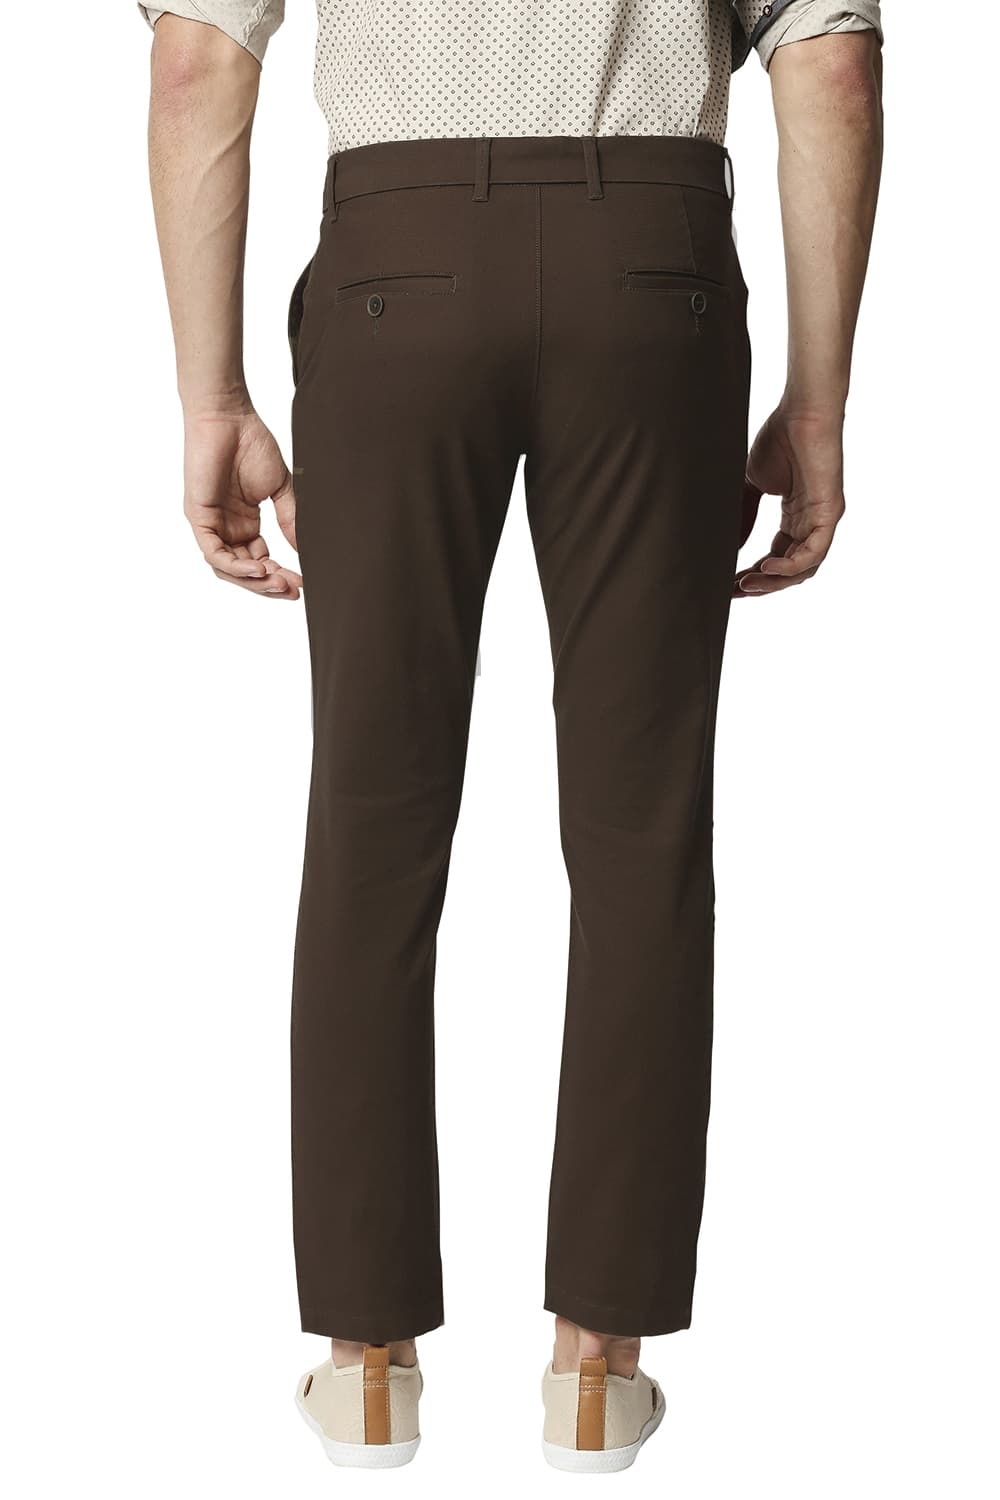 BASICS CASUAL SELF MID BROWN COTTON STRETCH TAPERED TROUSERS 